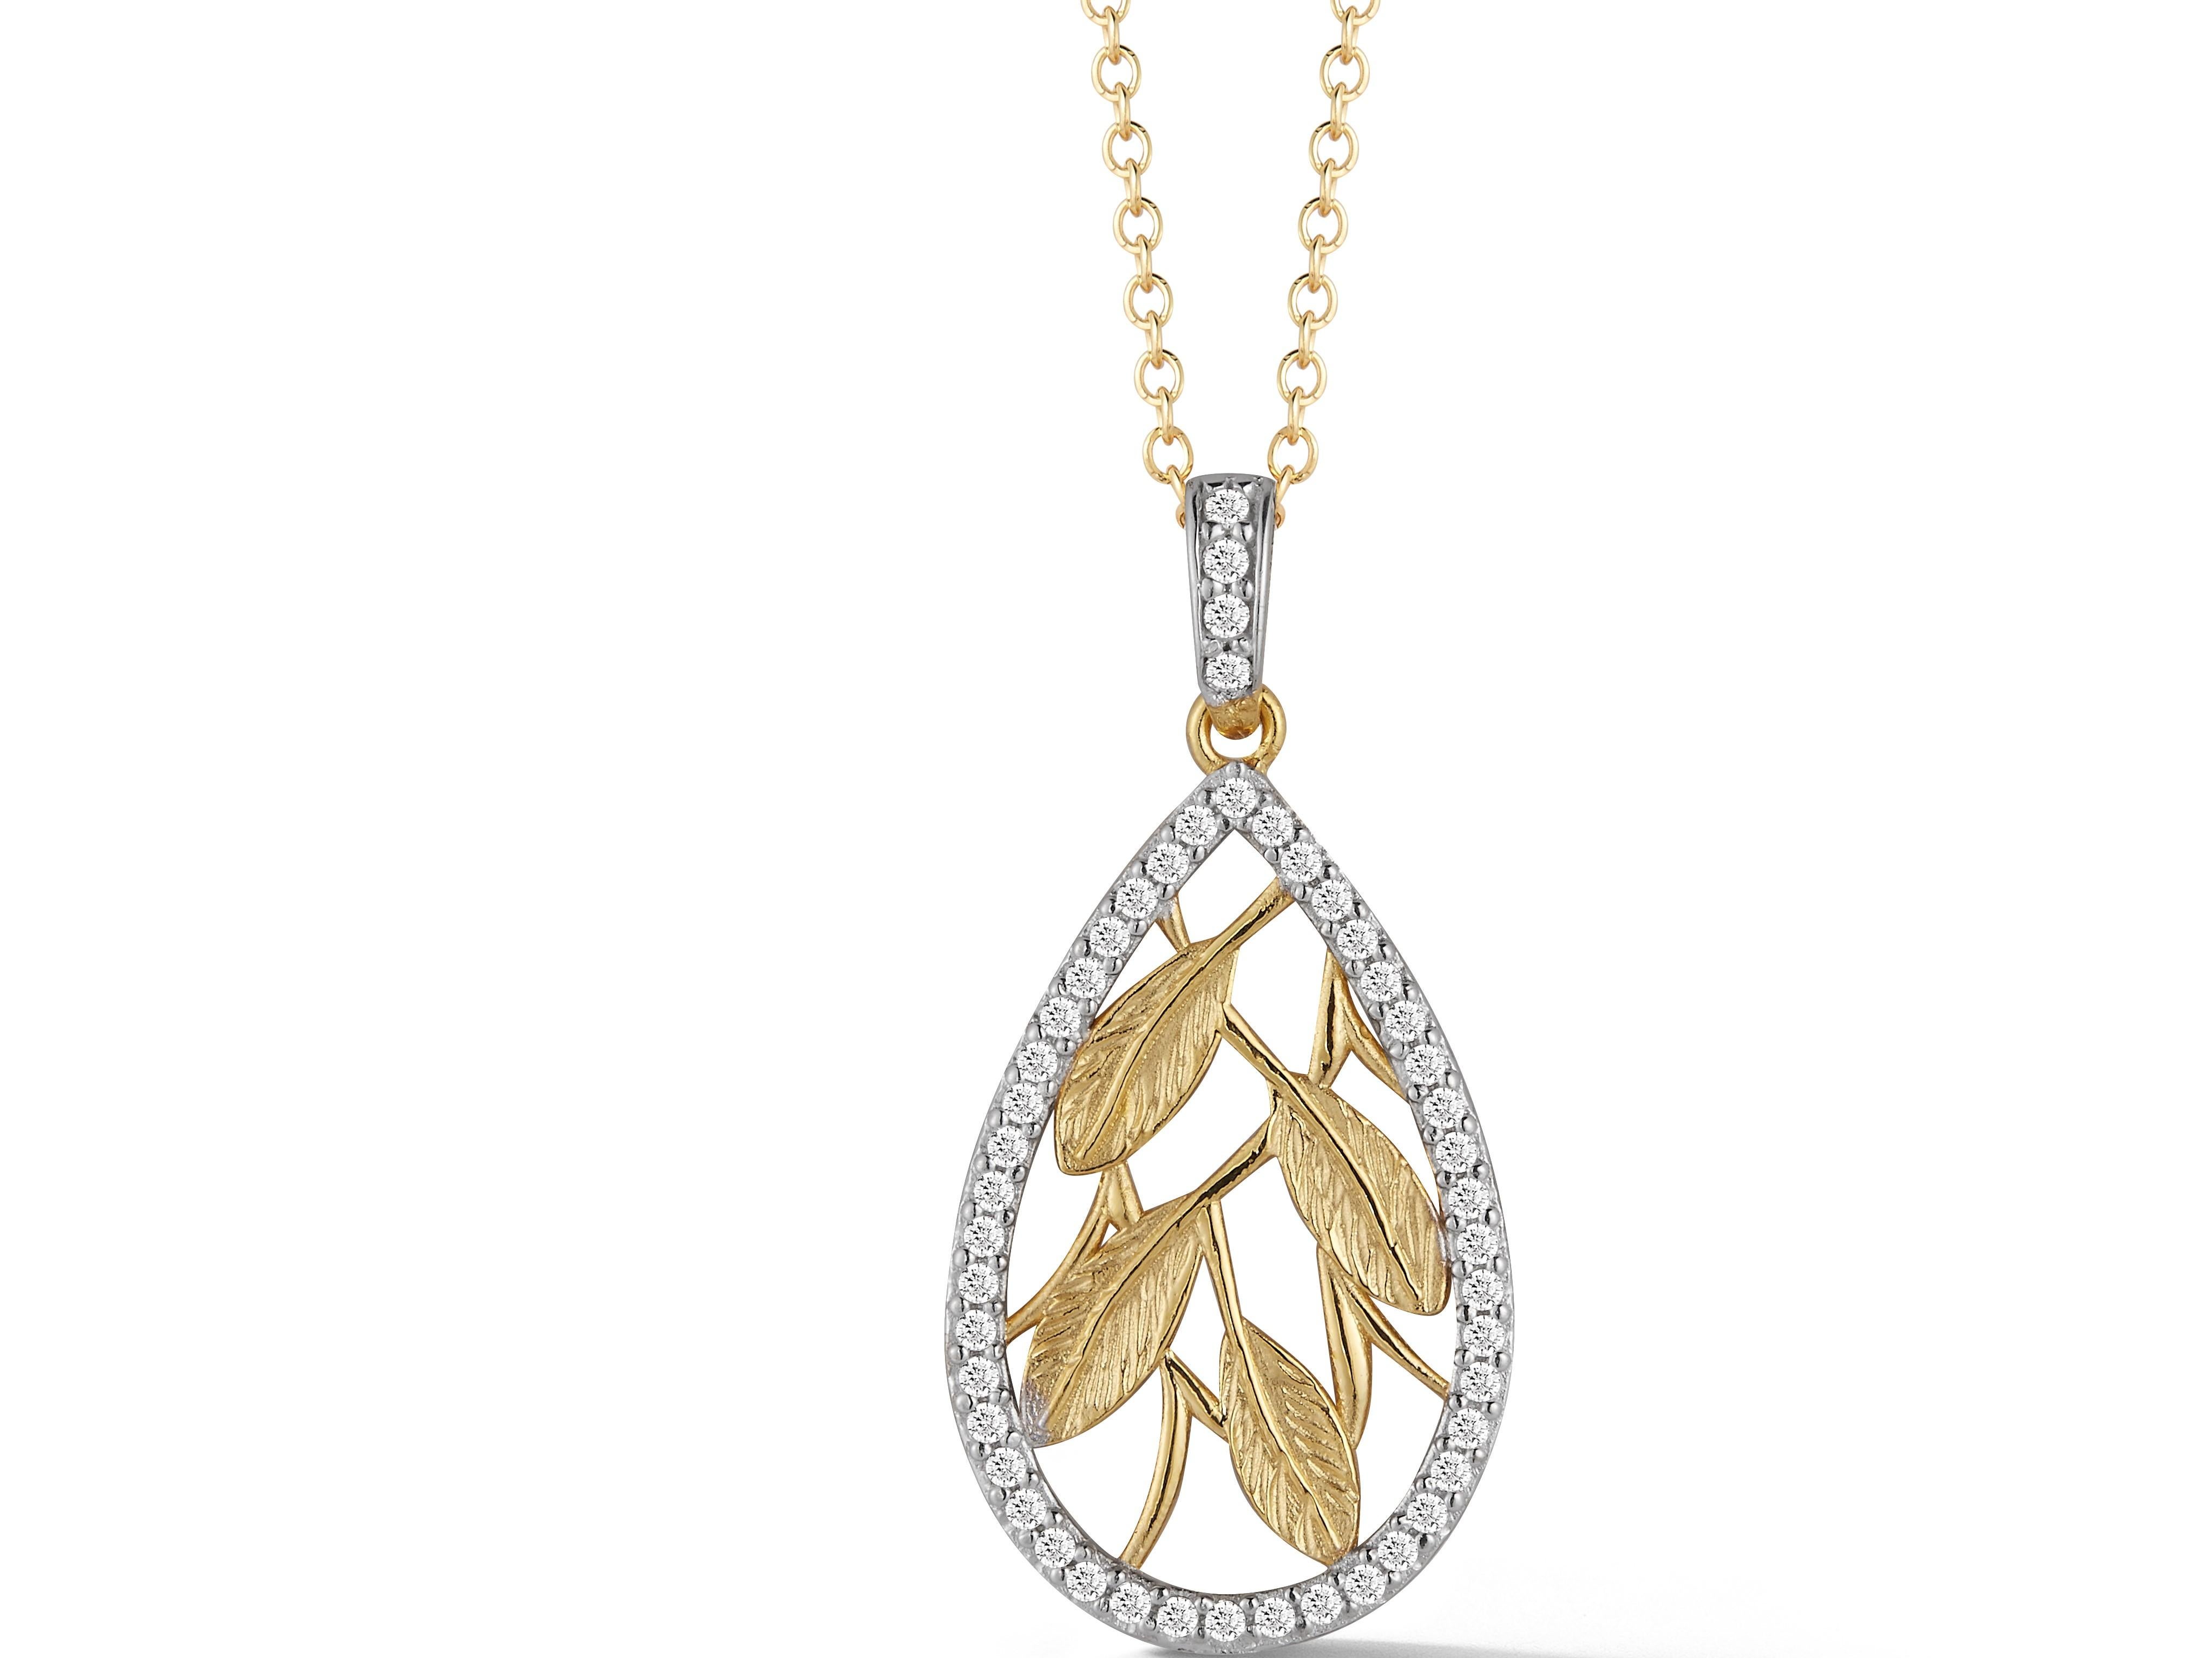 14 Karat Yellow Gold Hand-Crafted Polish and Texture-Finished Tear-Drop Pendant, Centered with a Vine Leaf Design, and Surrounded by 0.25 Carats Sliding on a 16